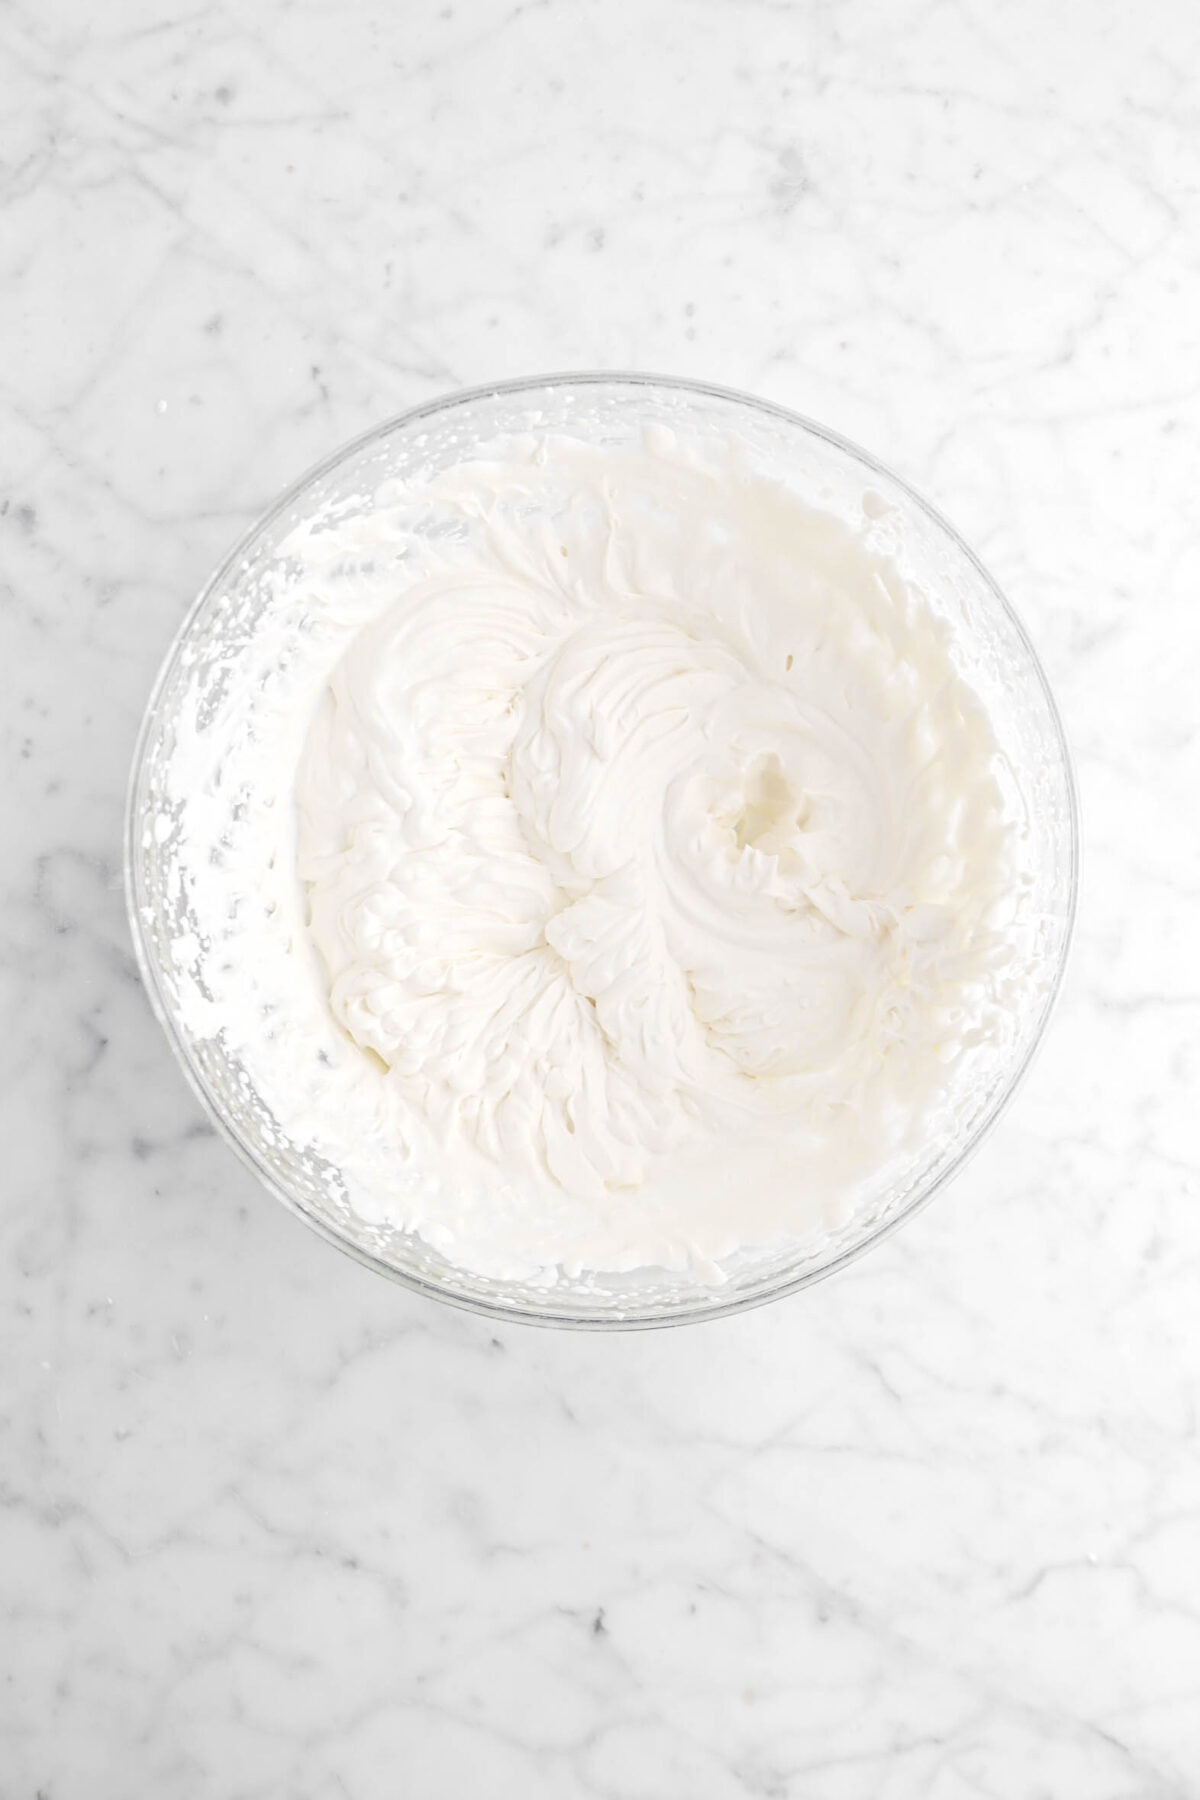 whipped chantilly cream in glass bowl